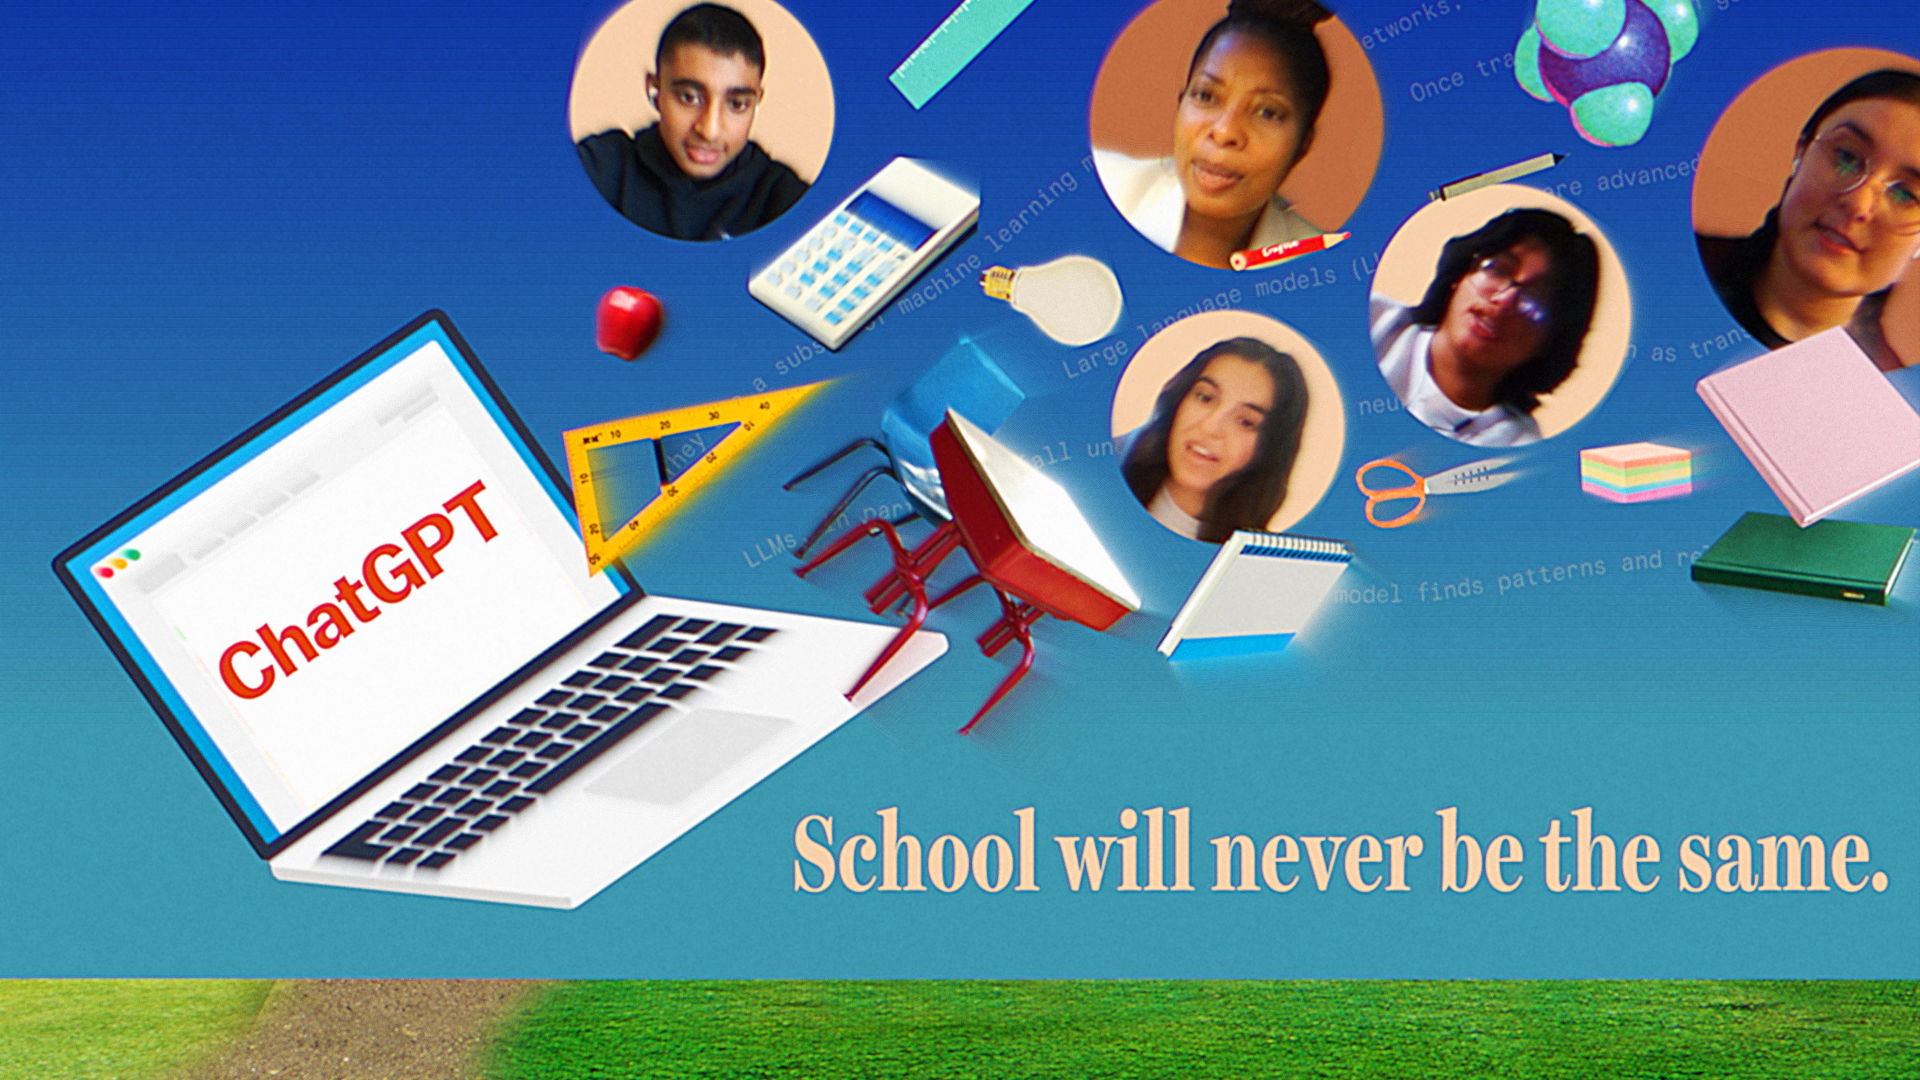 The illustration shows a laptop labeled “ChatGPT.” Flying out of the laptop are a variety of school-related items like rulers, books, and supplies, and photos of students and teachers.